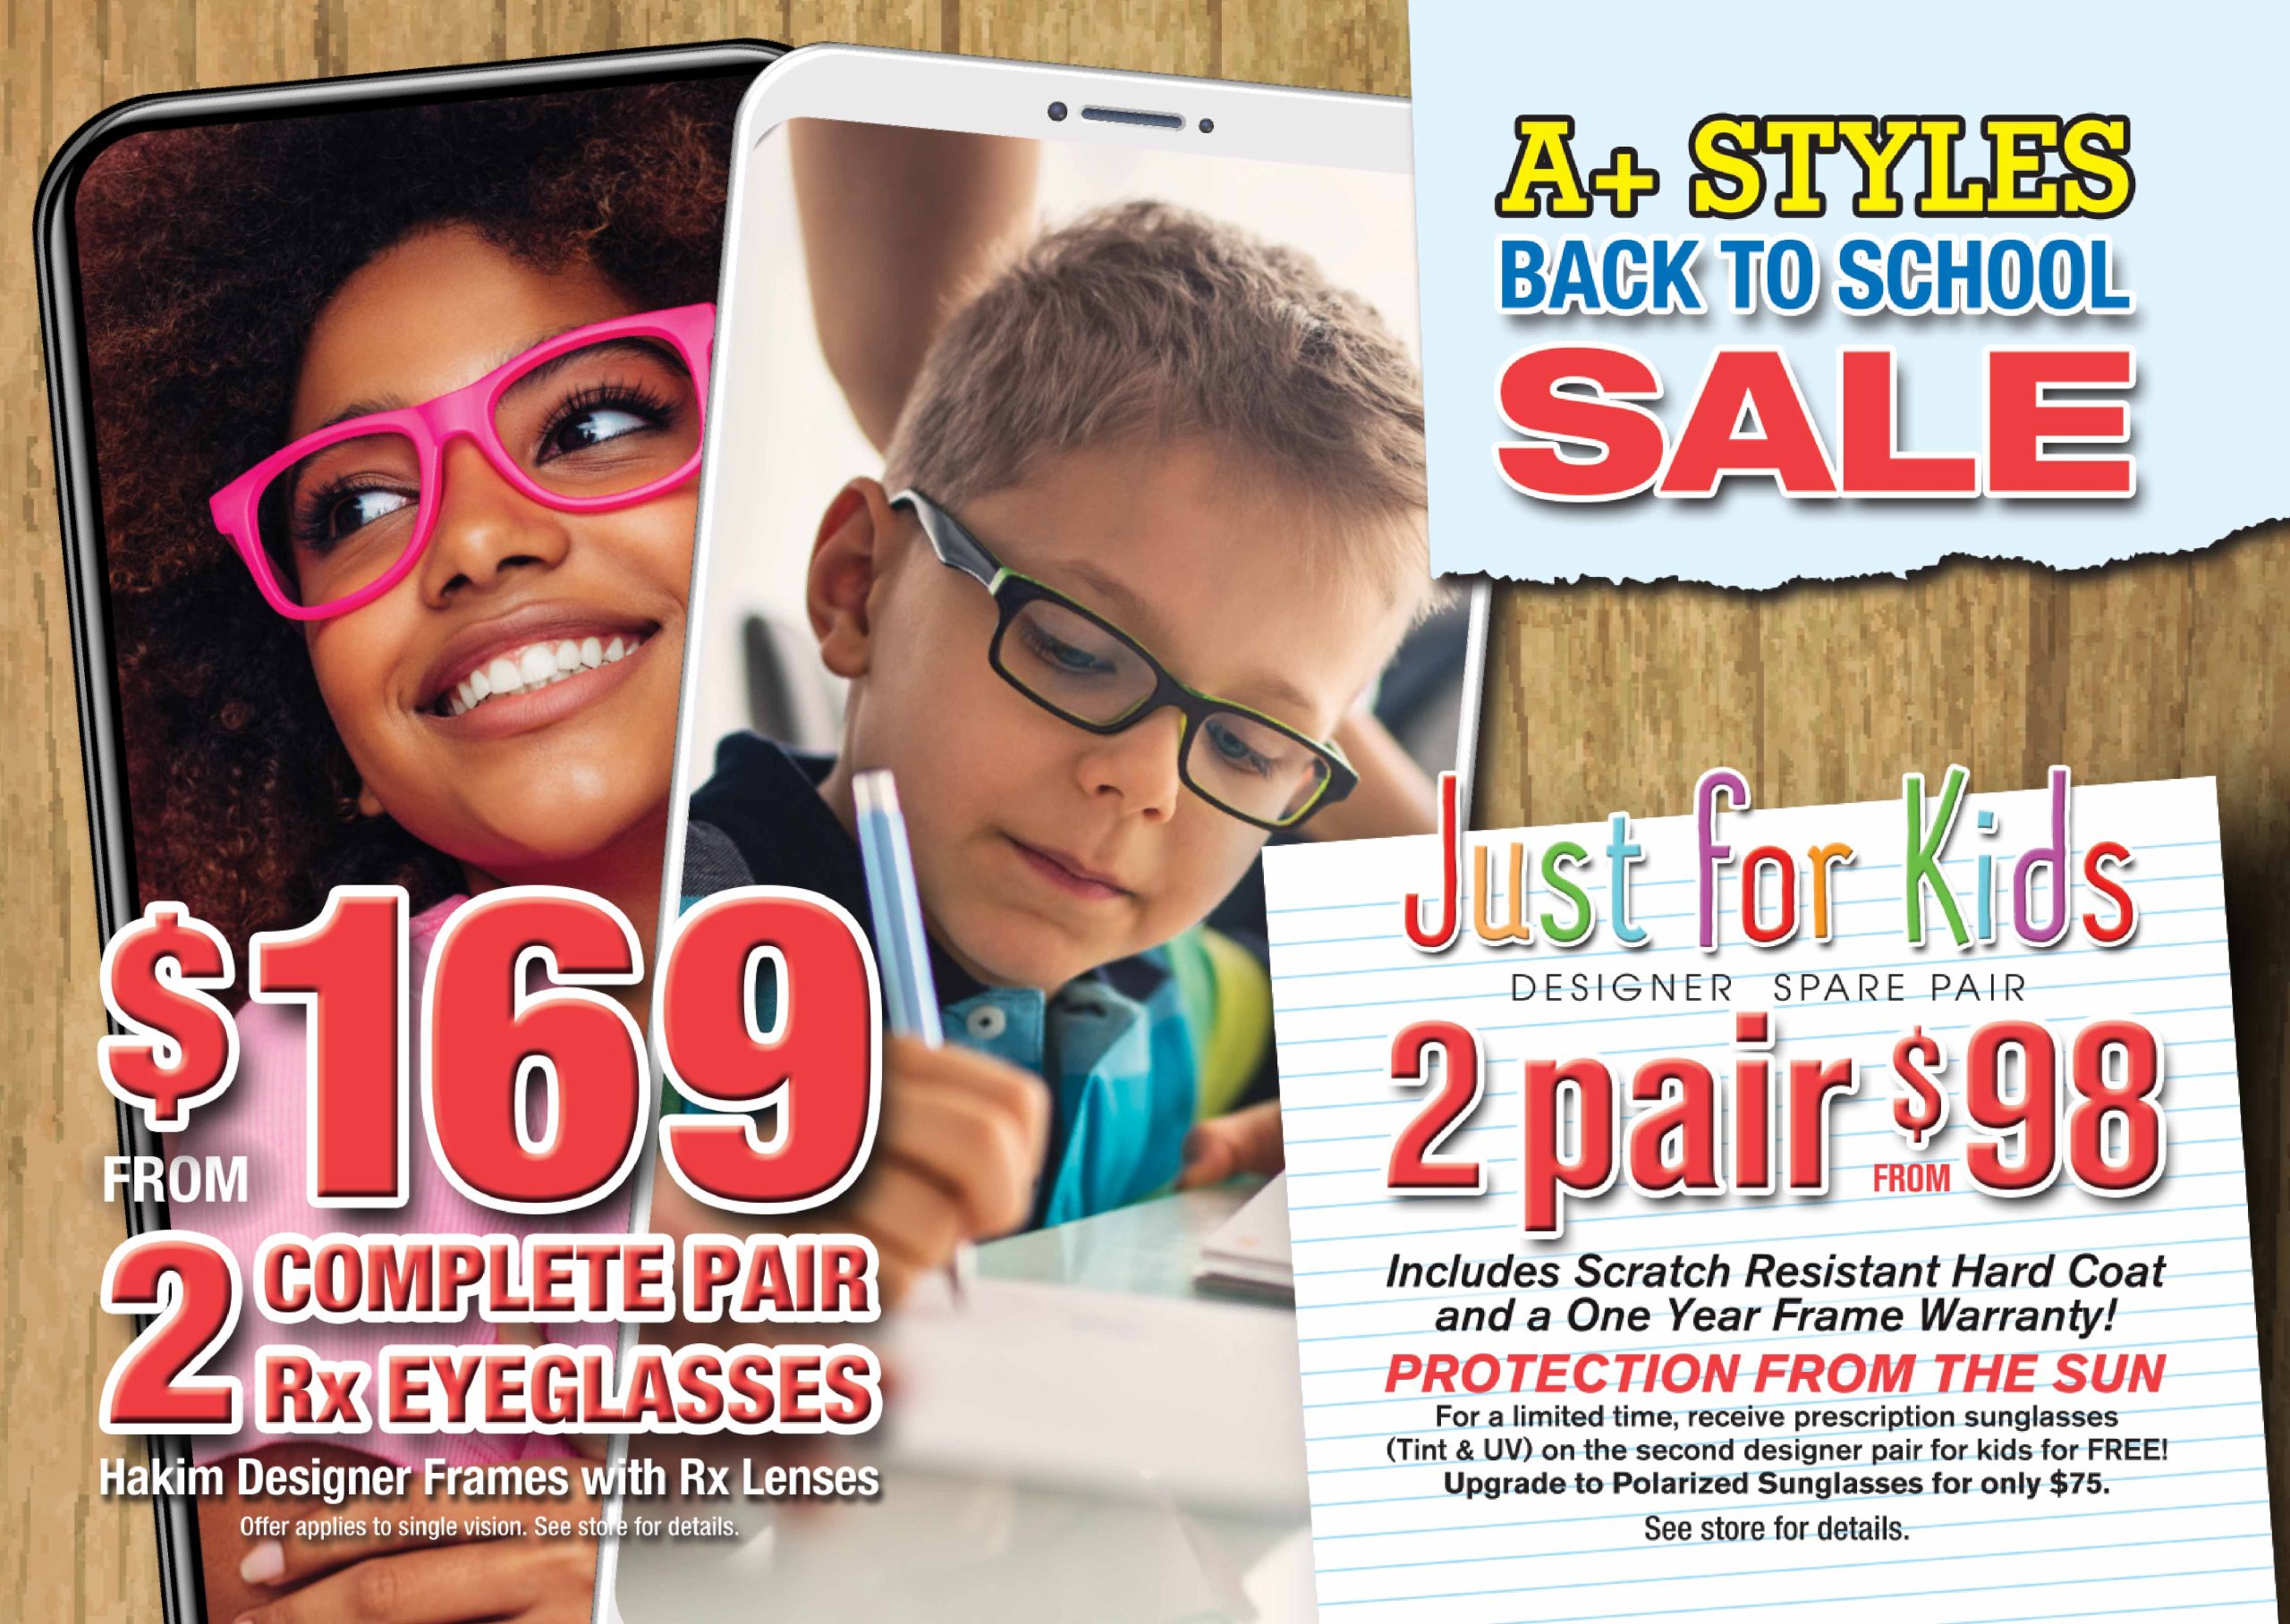 Just for kids - Get 2-pair from $98